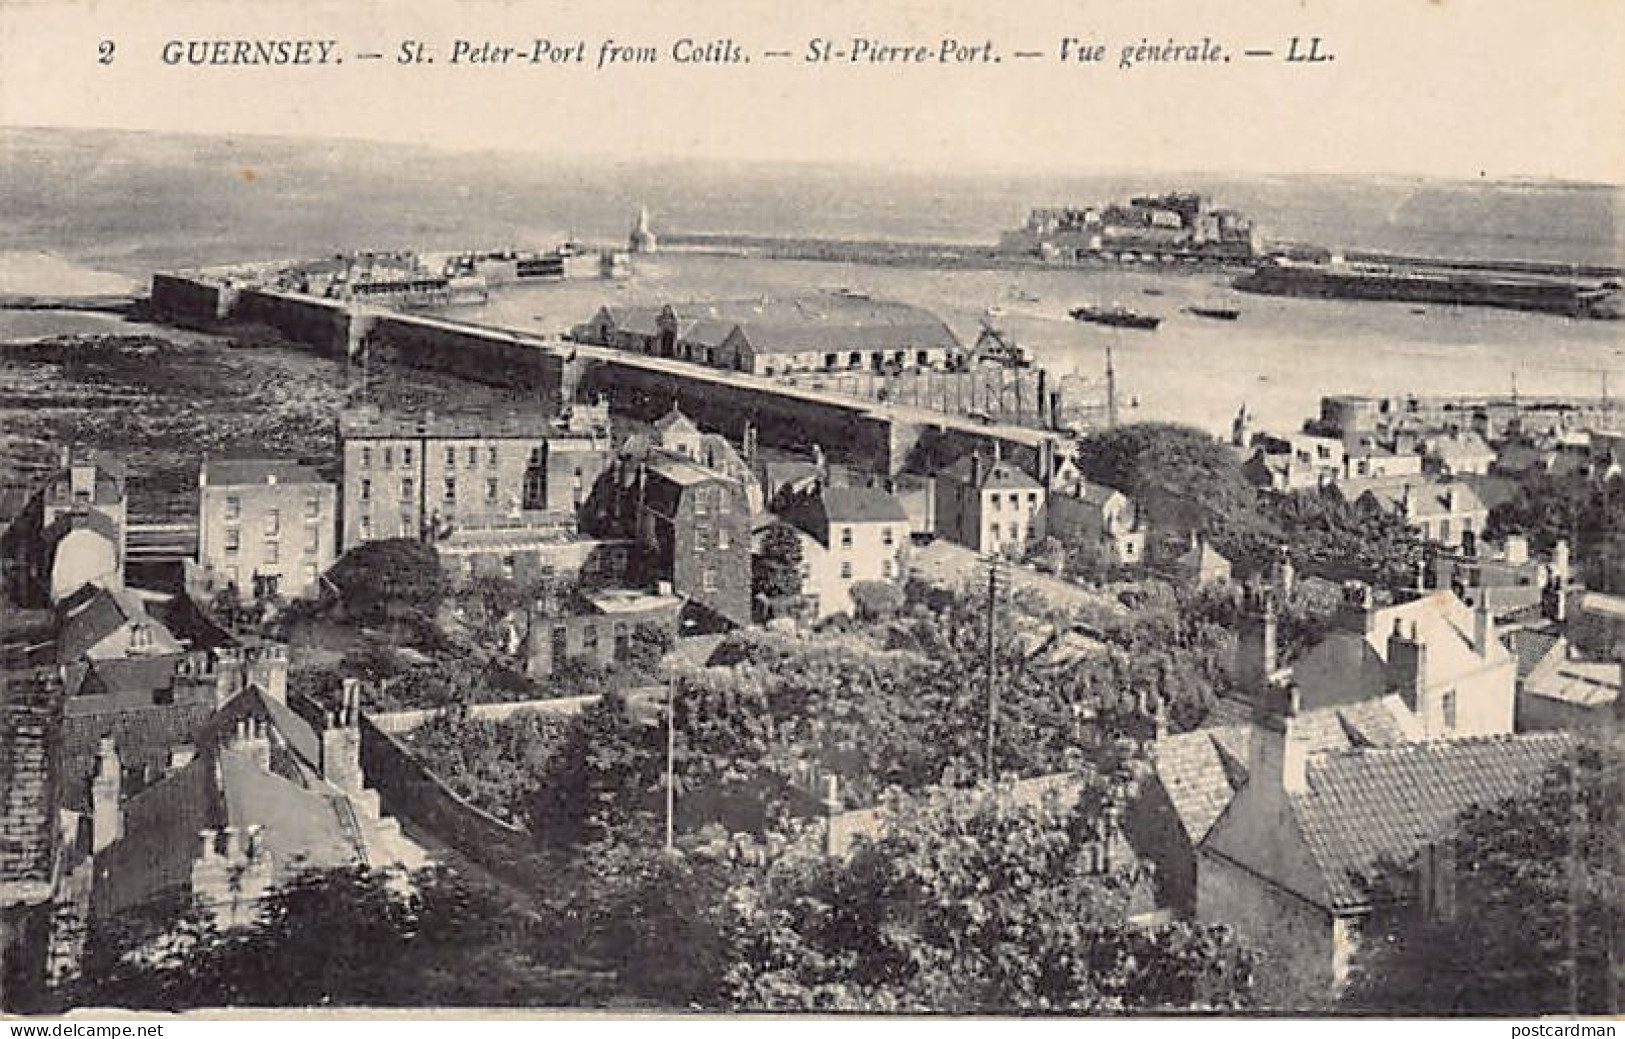 Guernsey - ST. PETER PORT - From Cotils - Publ. Levy L.L. 2 - Guernsey